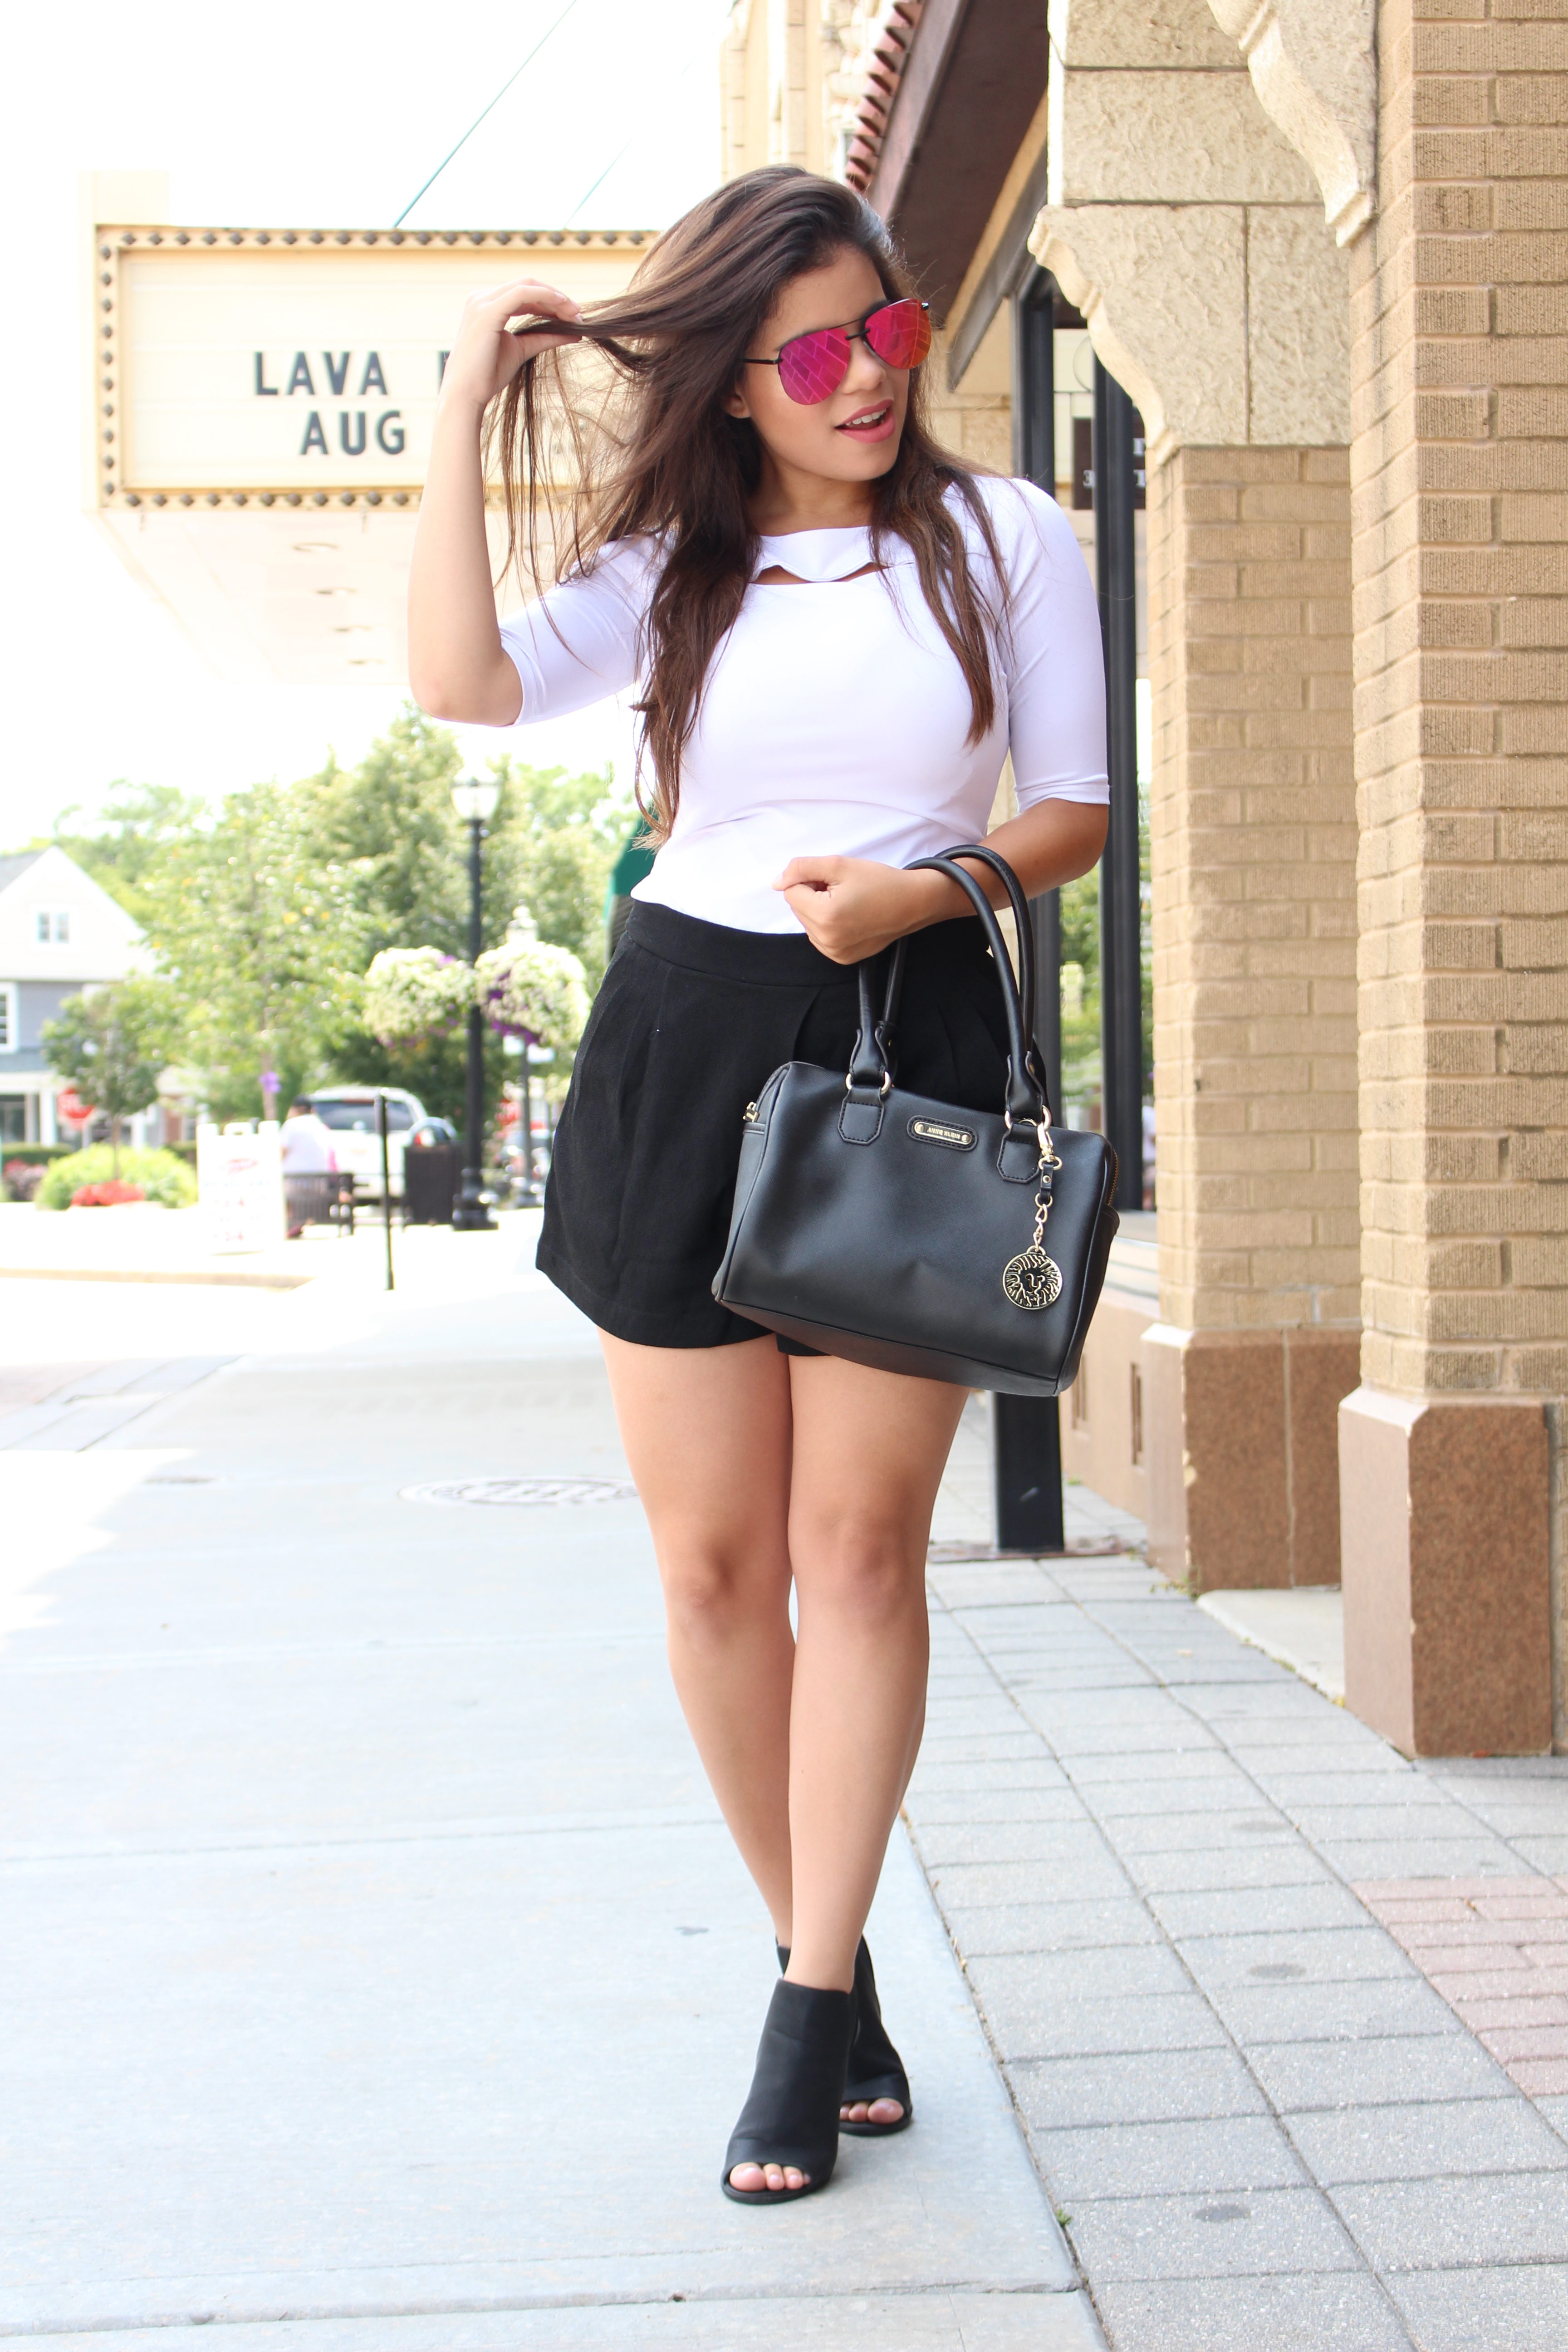 Black and White OOTD ann klein summer casual outfti call it spring shoes quay australia the playa details OOTN date night outfit by Tu Fashion Petite Alejandra Avila